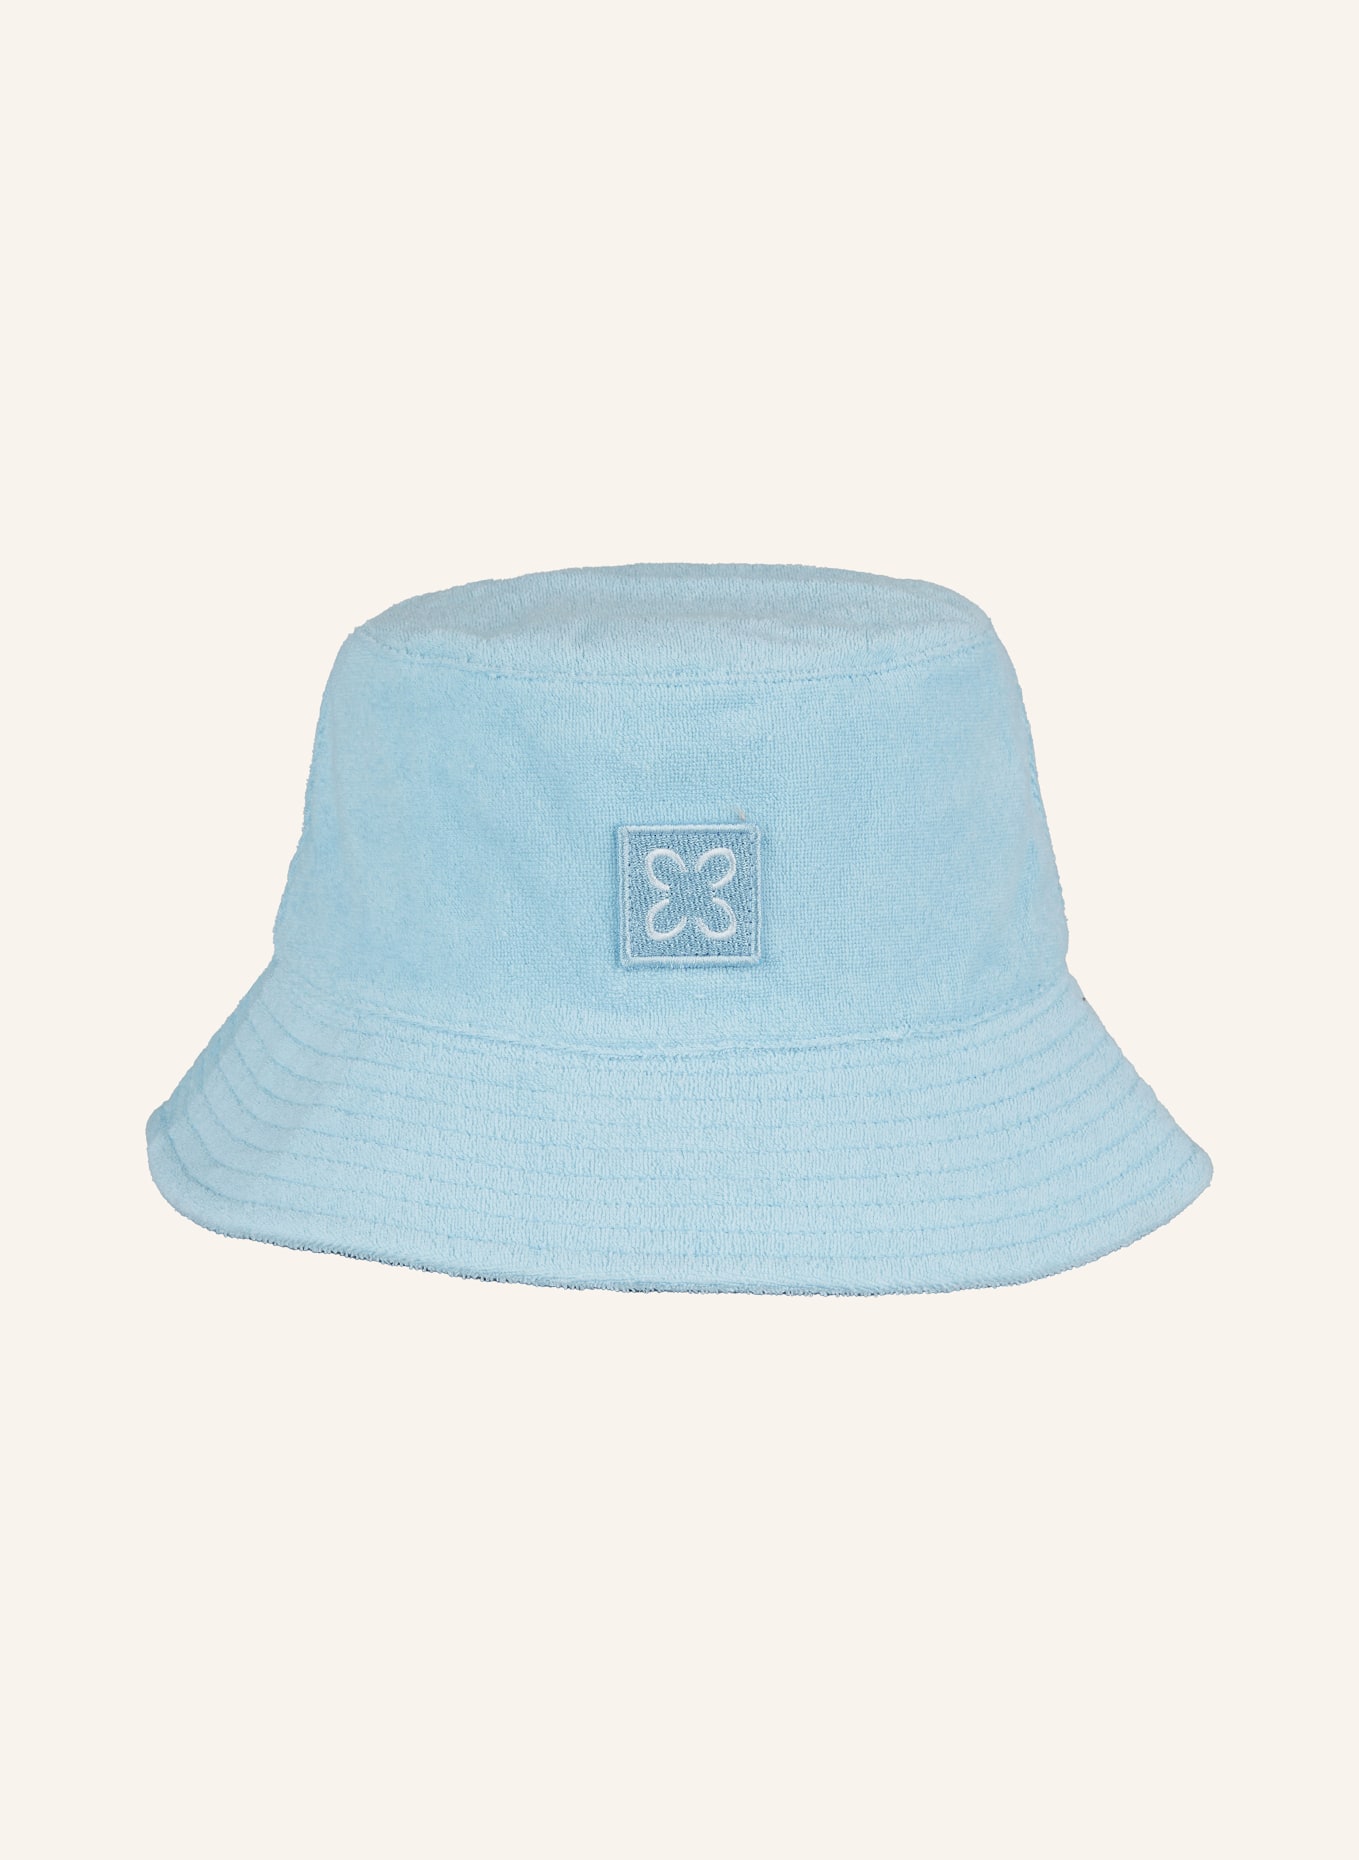 CODELLO Bucket hat made of terry cloth, Color: LIGHT BLUE (Image 2)